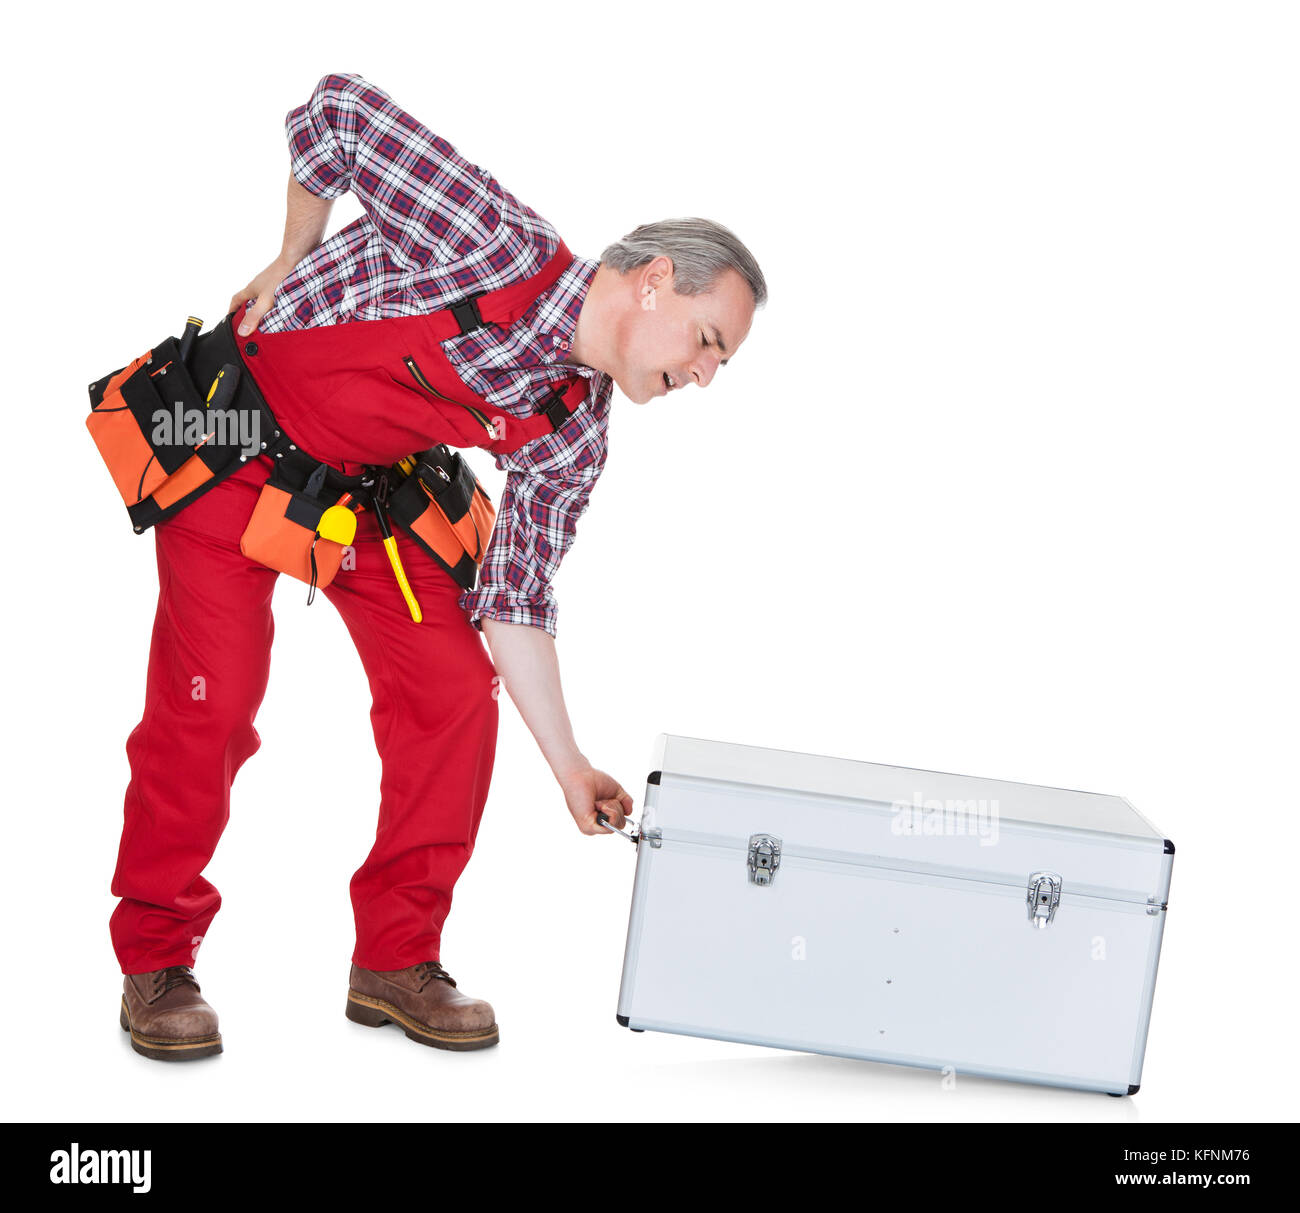 Man Technician With Back Pain Lifting Metal Box isolated on white background Stock Photo